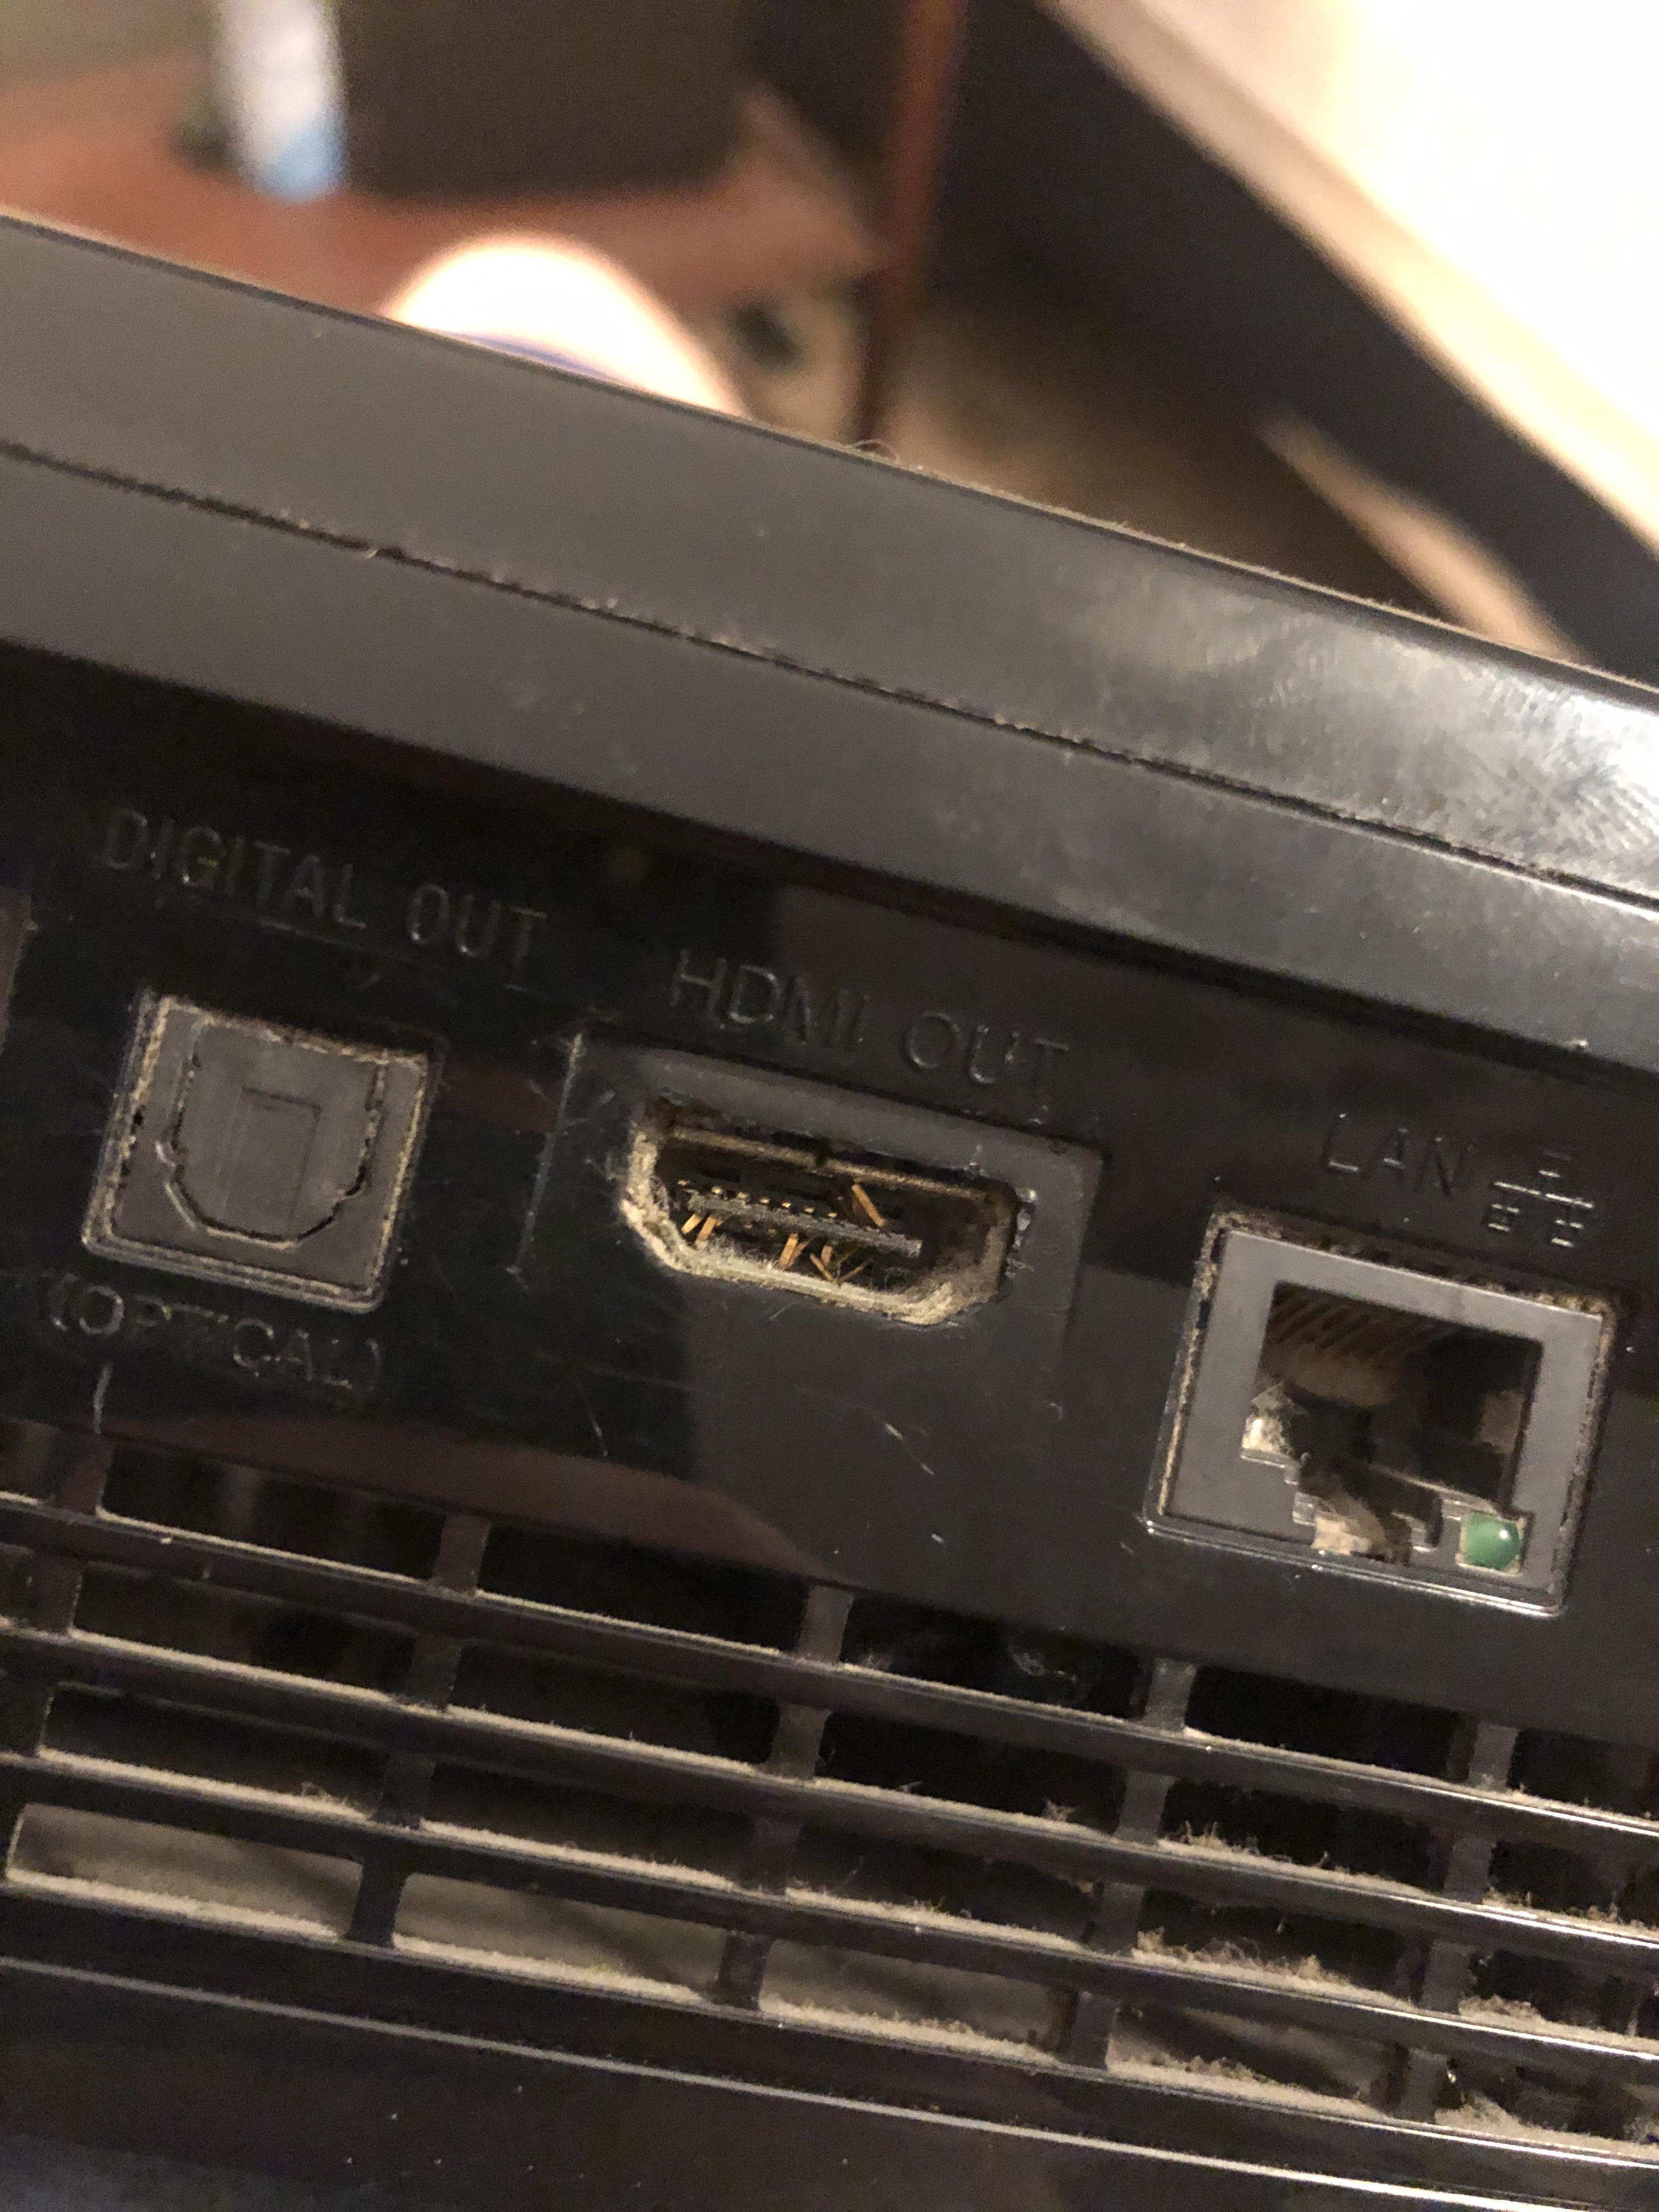 Inspect the HDMI port on the PS3 and make sure there are no bent or damaged pins.
If any pins are bent, it may require professional repair.